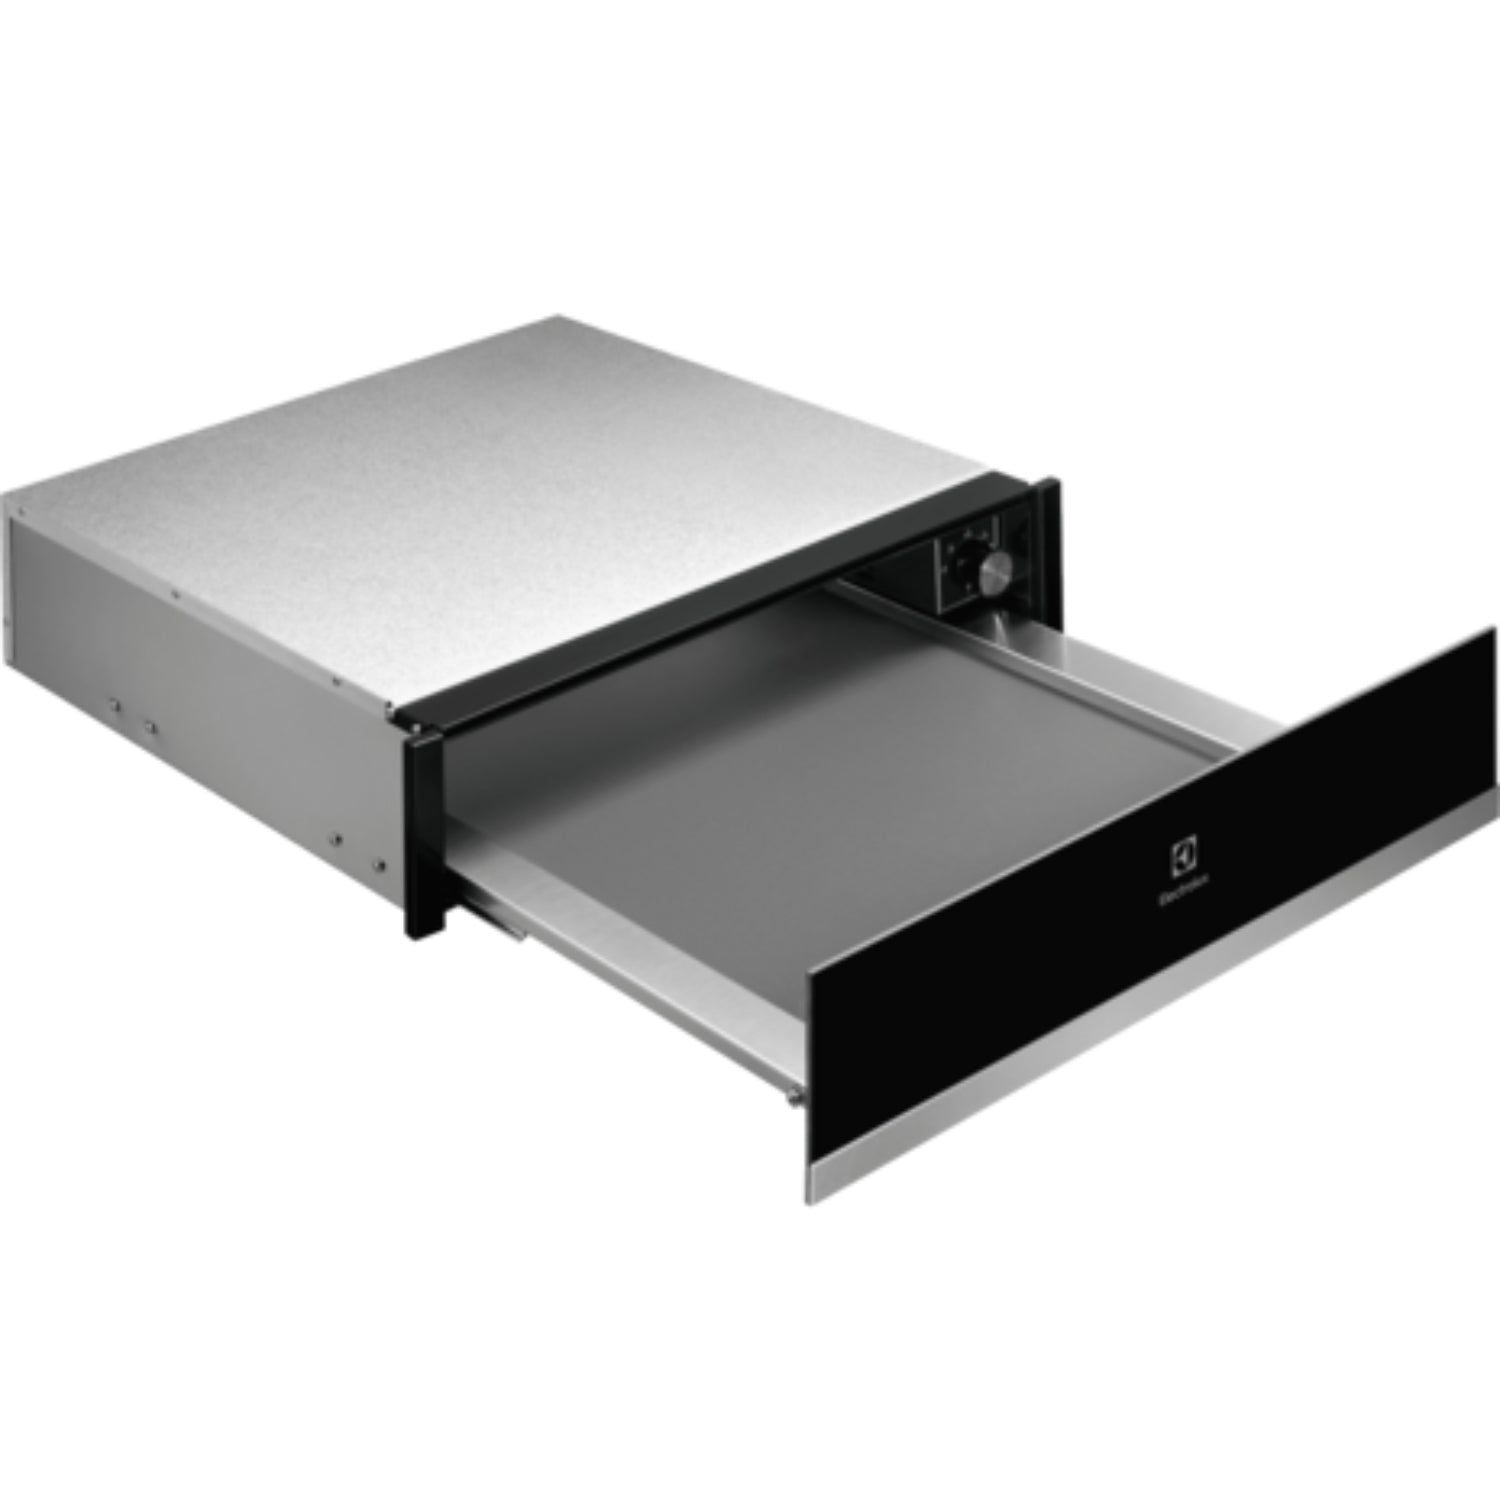 Electrolux 60cm UltimateTaste 700 built-in warming drawer with 6 place settings capacity